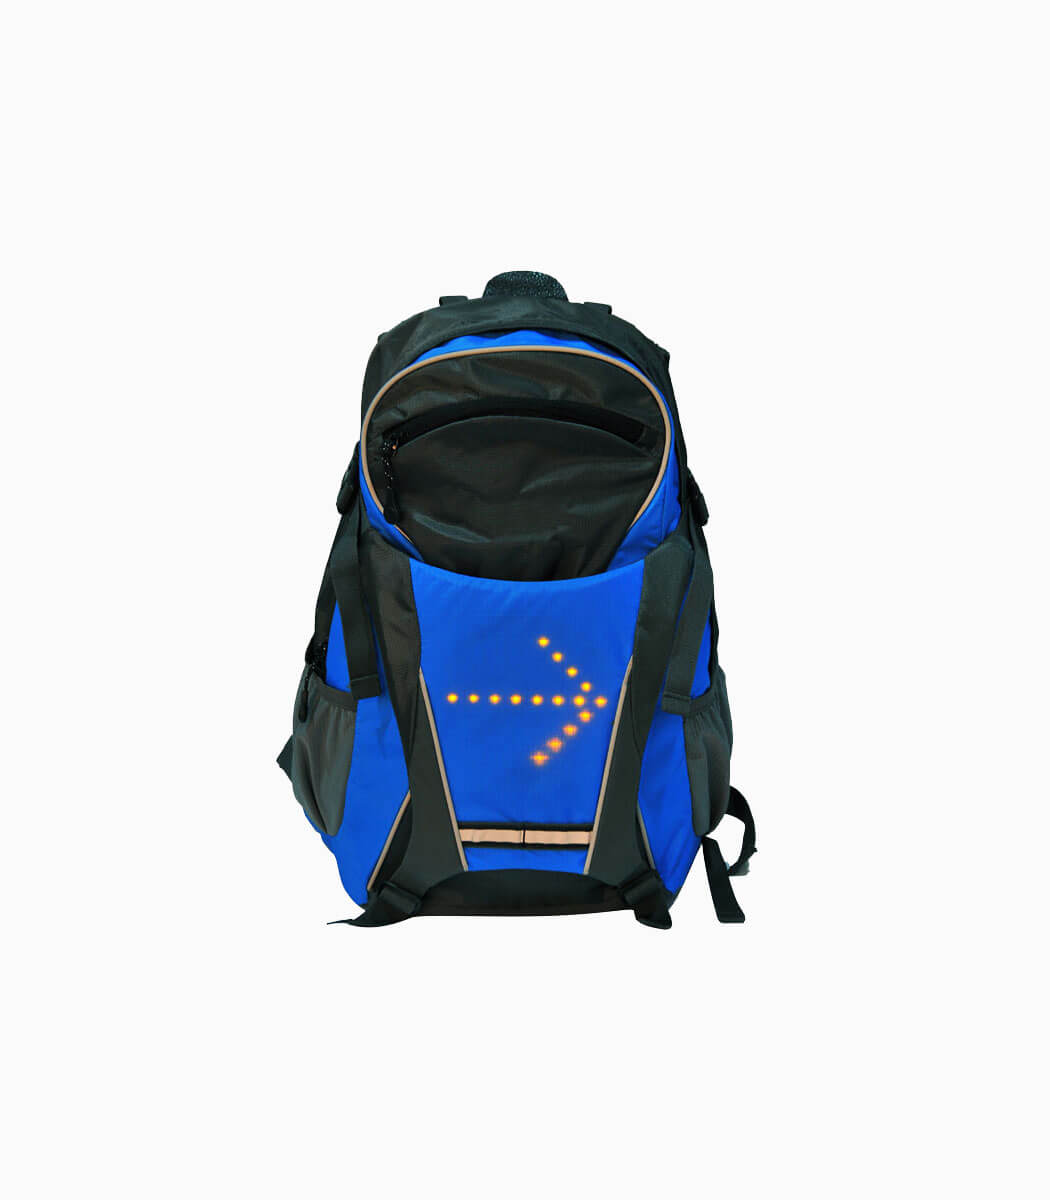 LIGHT ARMOR BP+ (BLUE) cycling backpack with signal lights front with turn right indicator